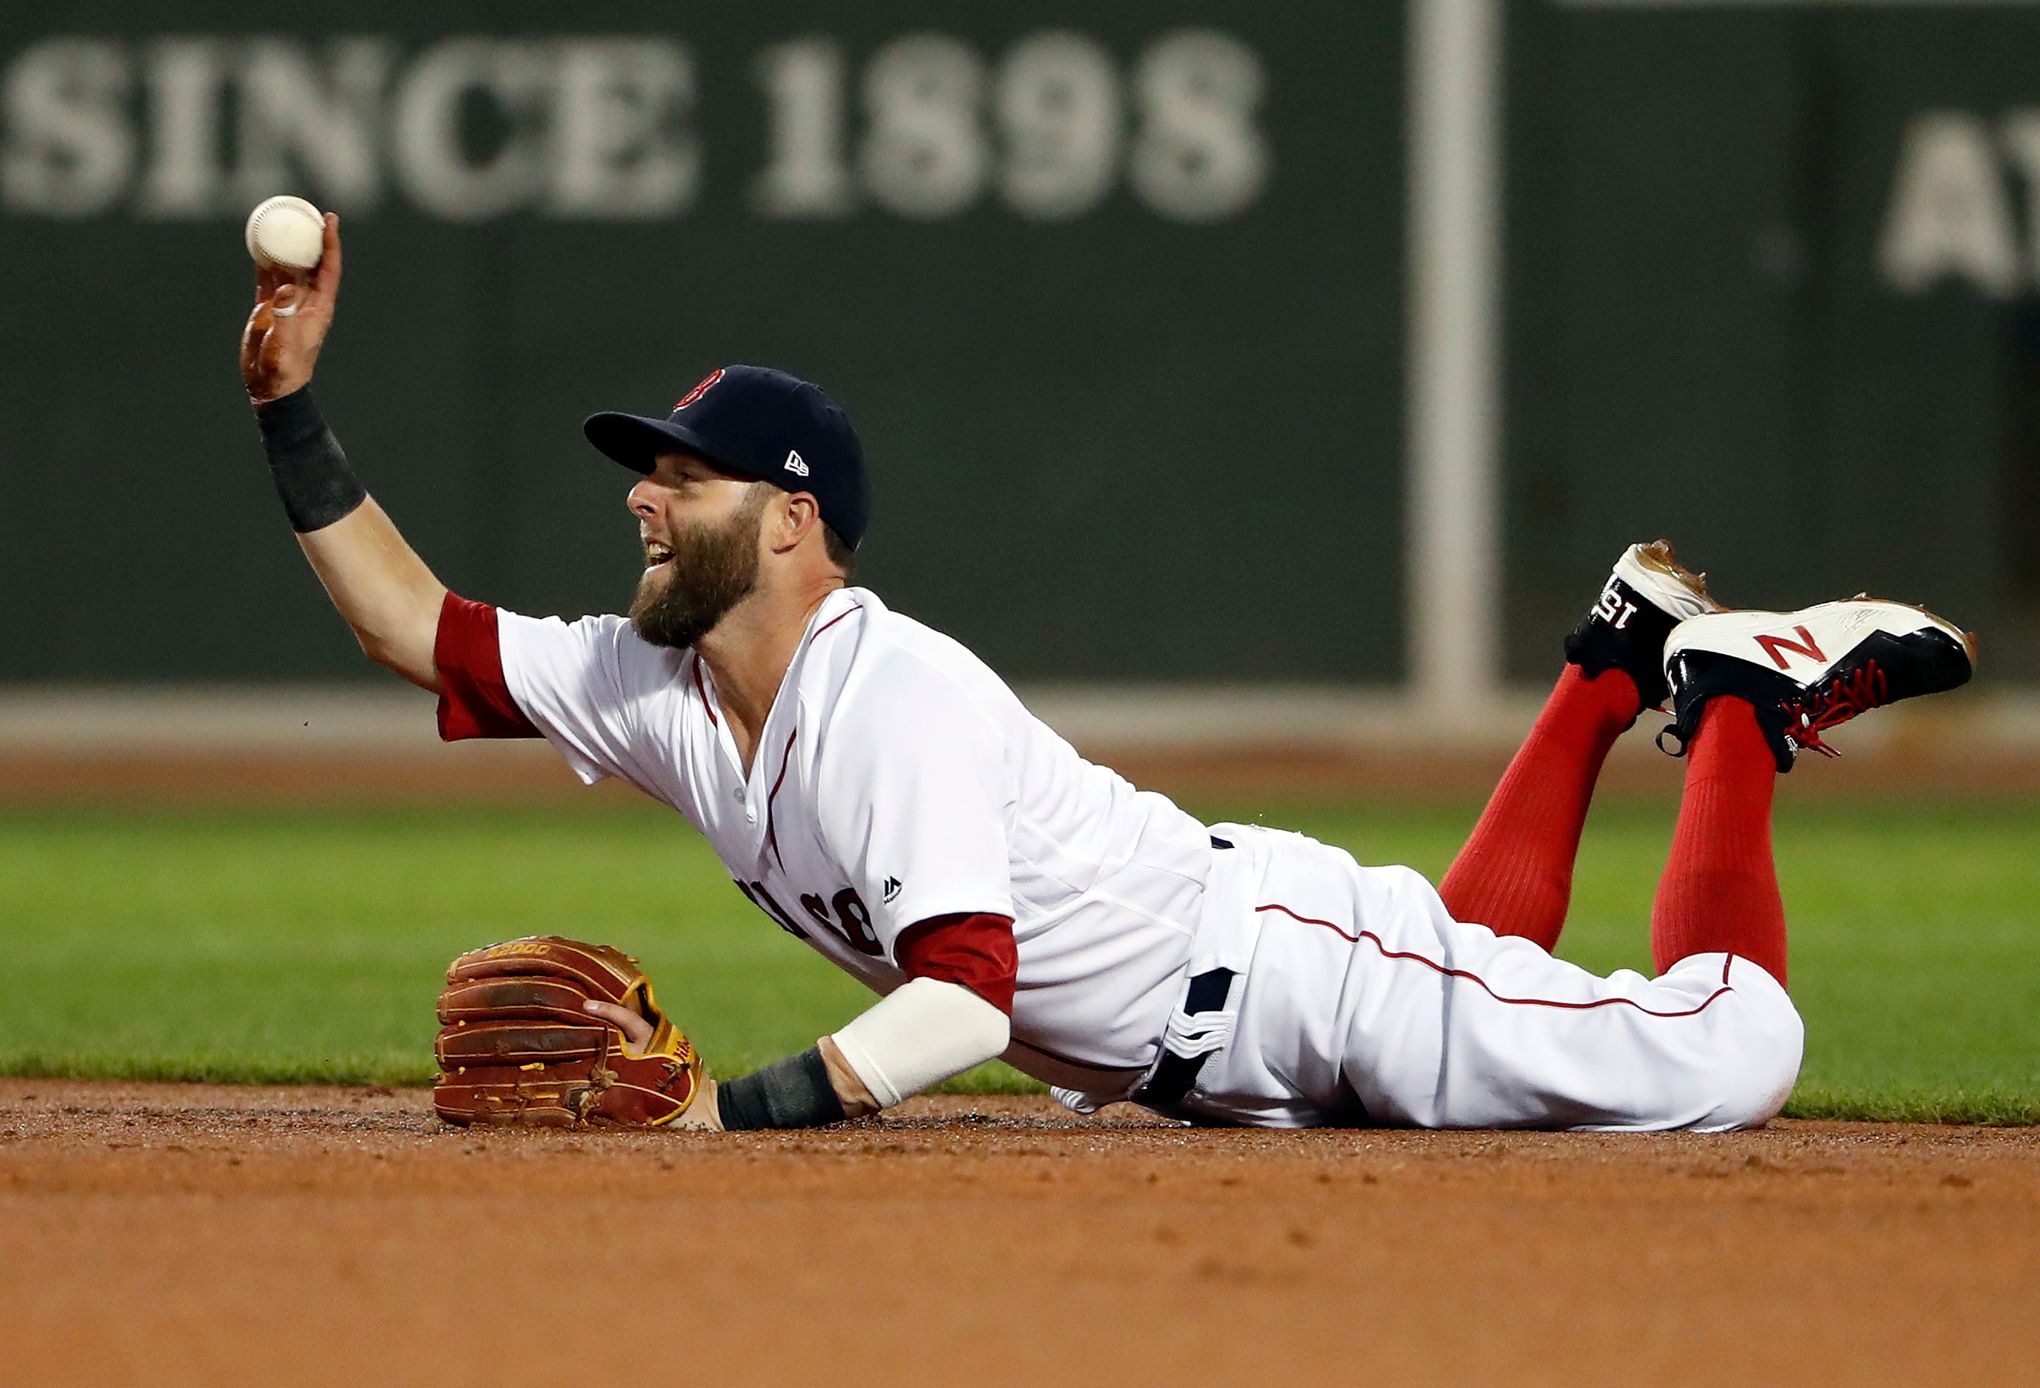 Red Sox star Pedroia says why such a fuss over sign stealing